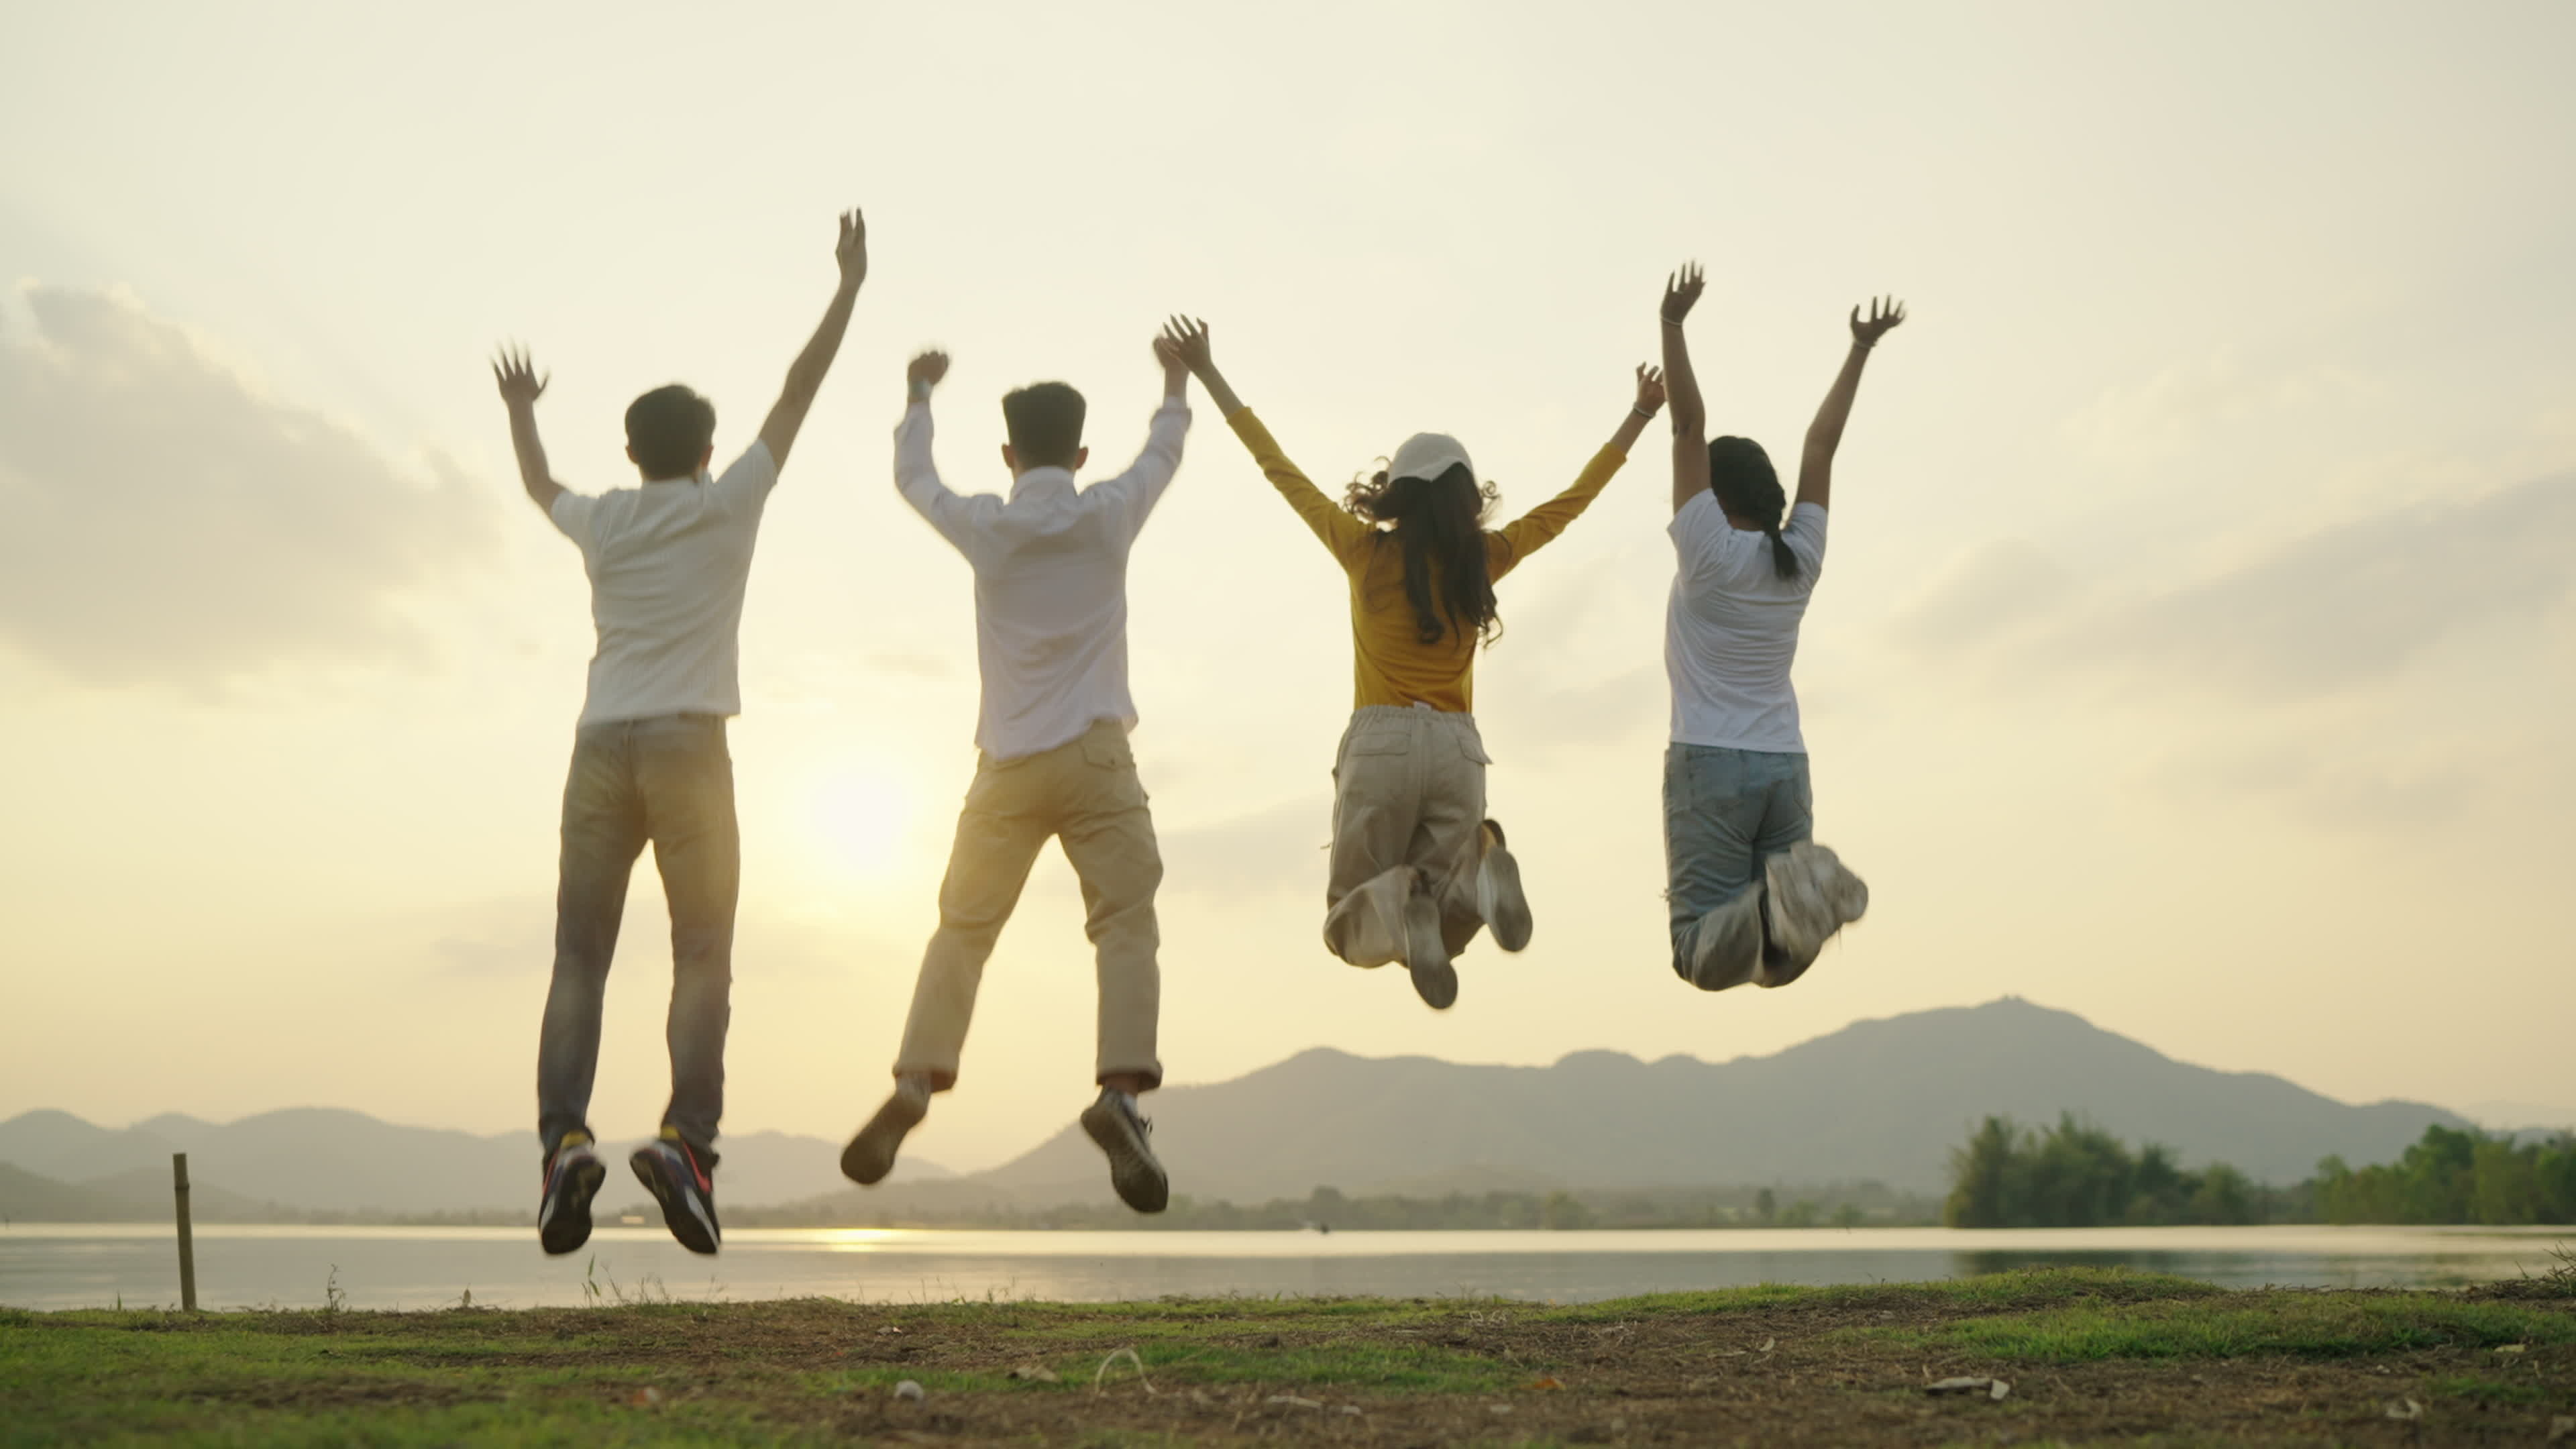 Jumping: Four people, Group of happy teenagers, Raising hands, Sunset, Mountain and river. 3840x2160 4K Wallpaper.